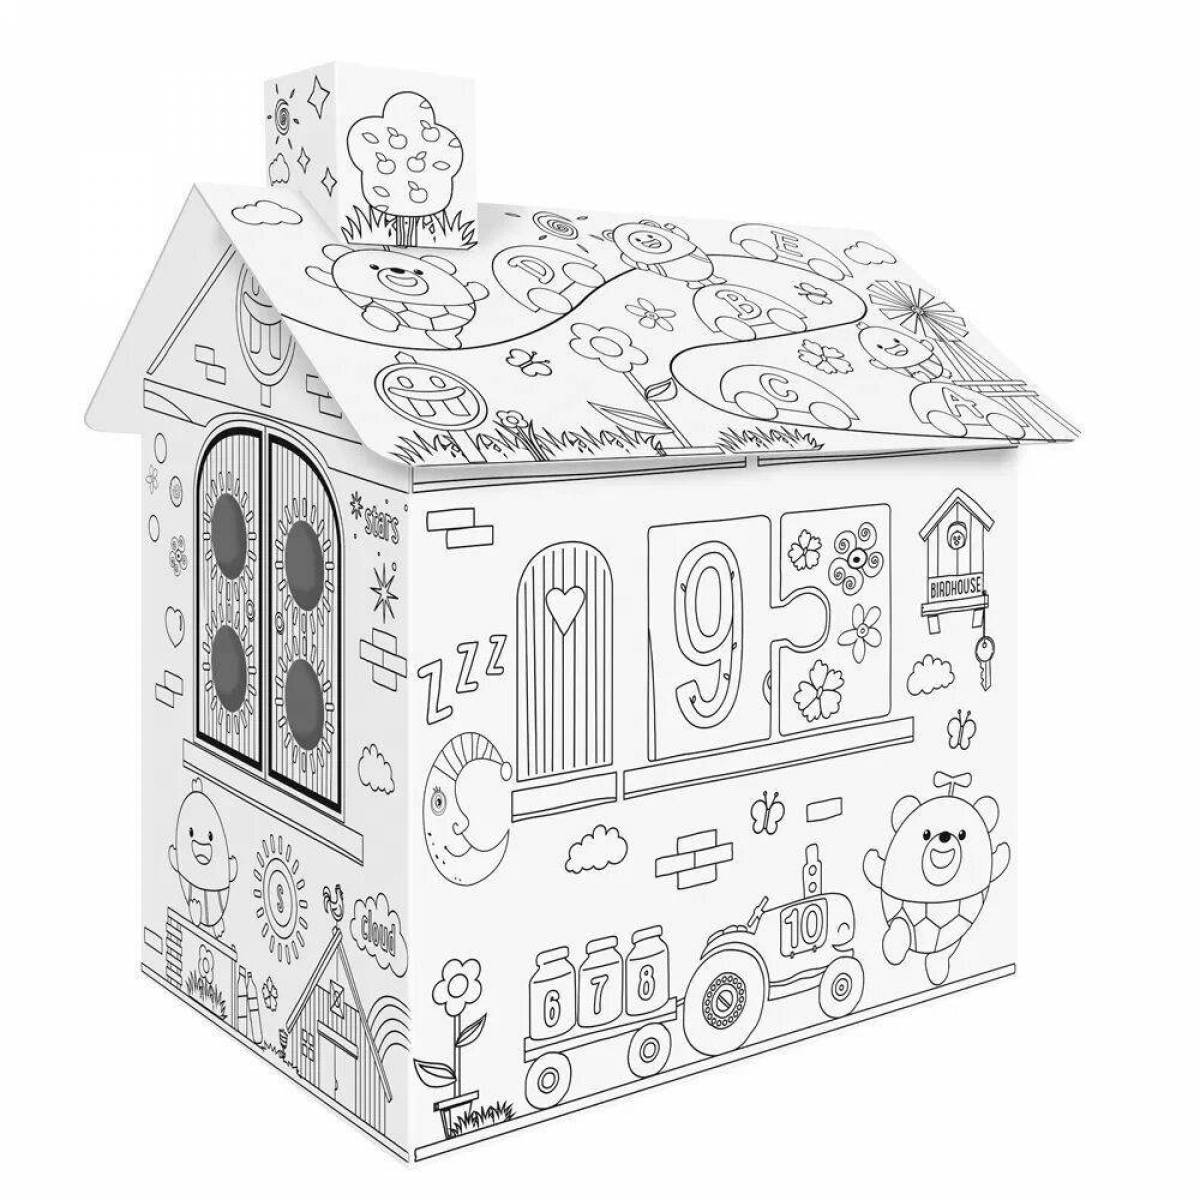 Outstanding coloring of the cardboard house for babies